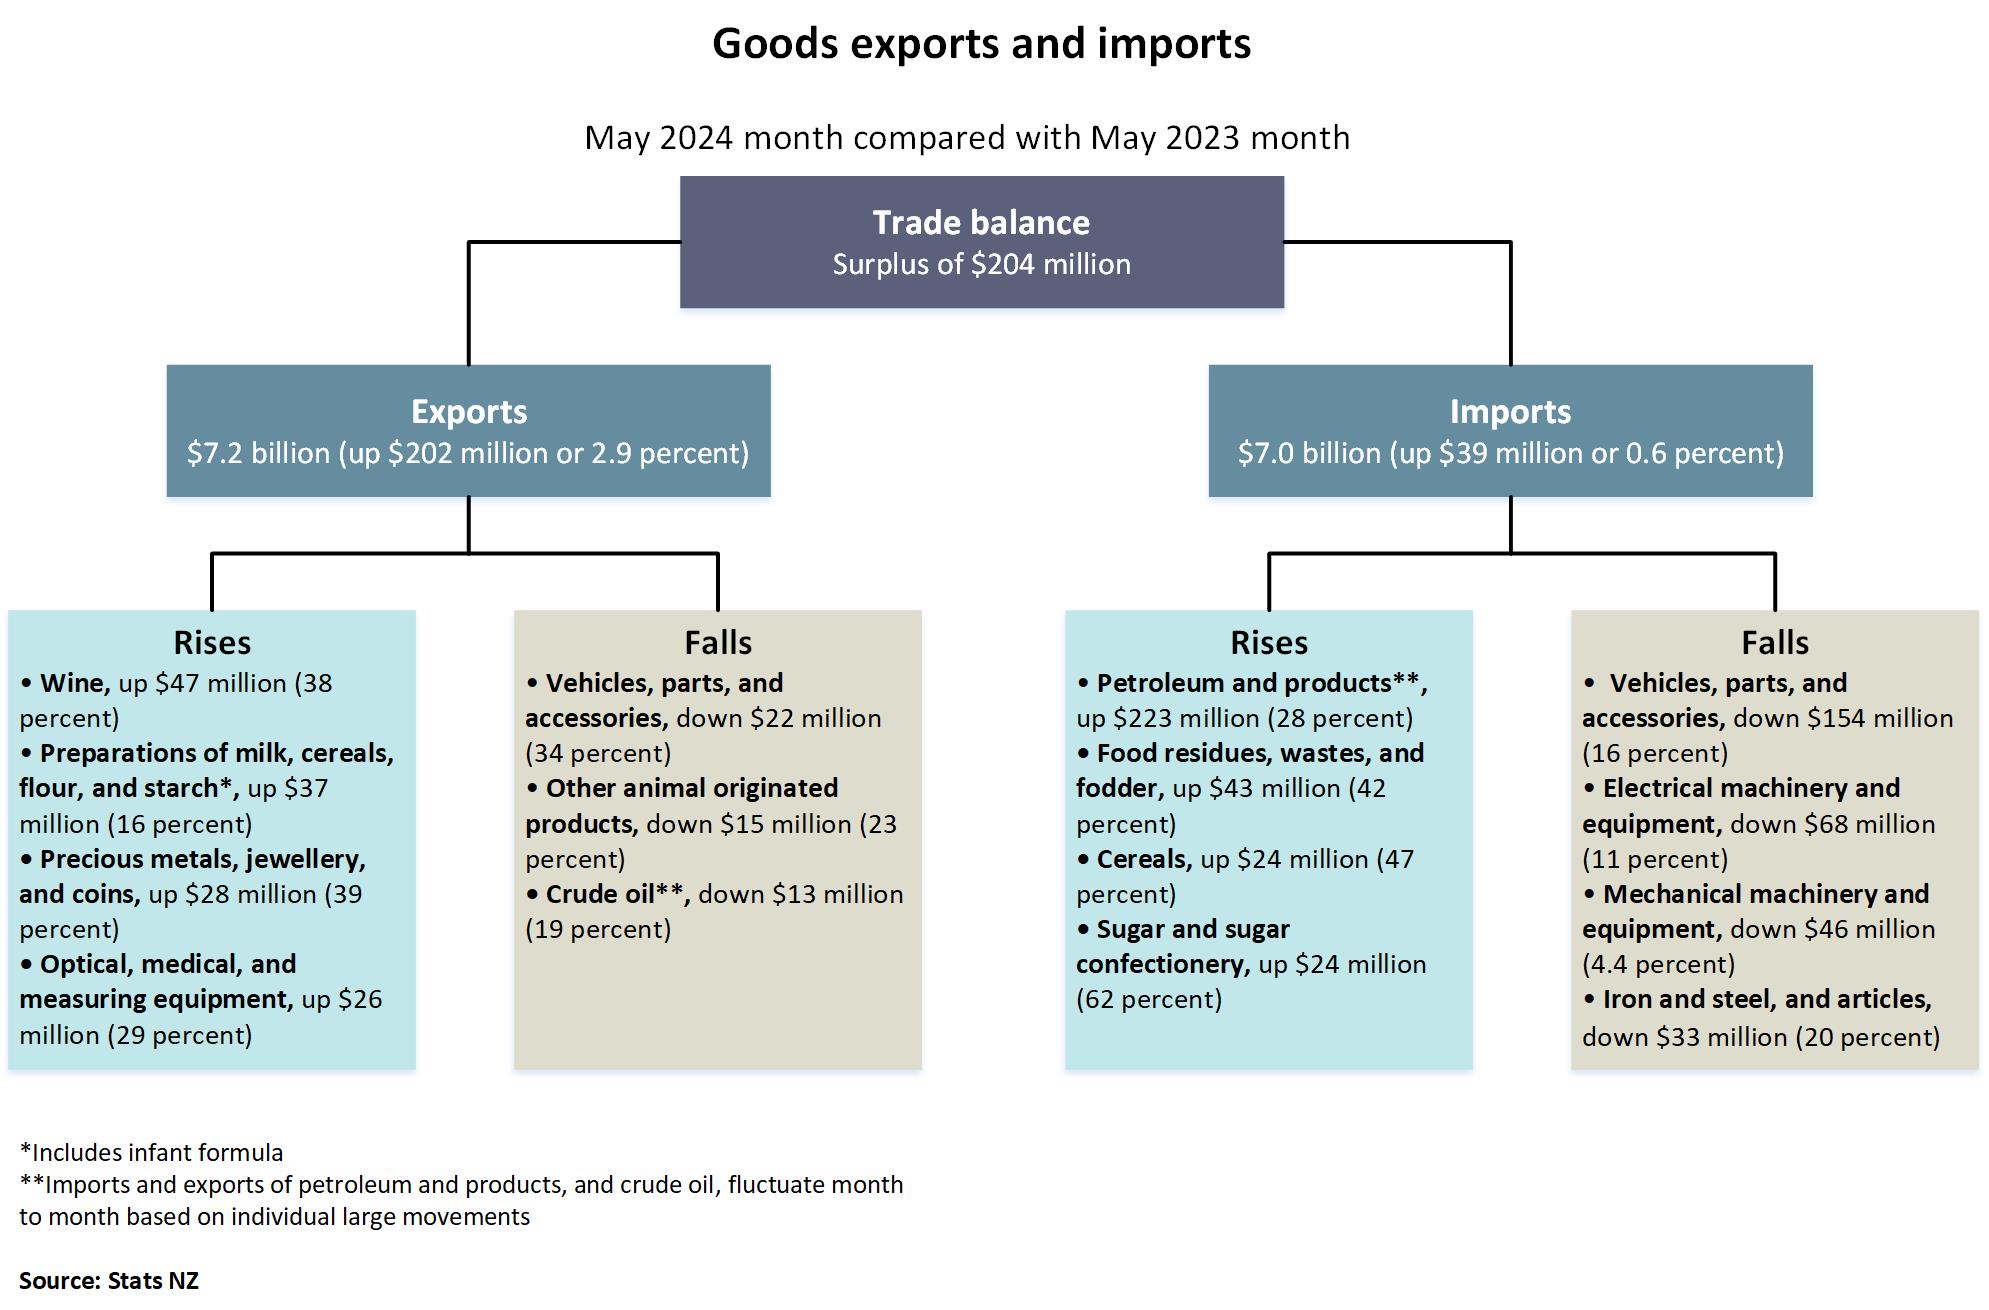 Diagram showing goods exports and imports, May 2024 month compared with May 2023 month. Text alternative available below diagram.